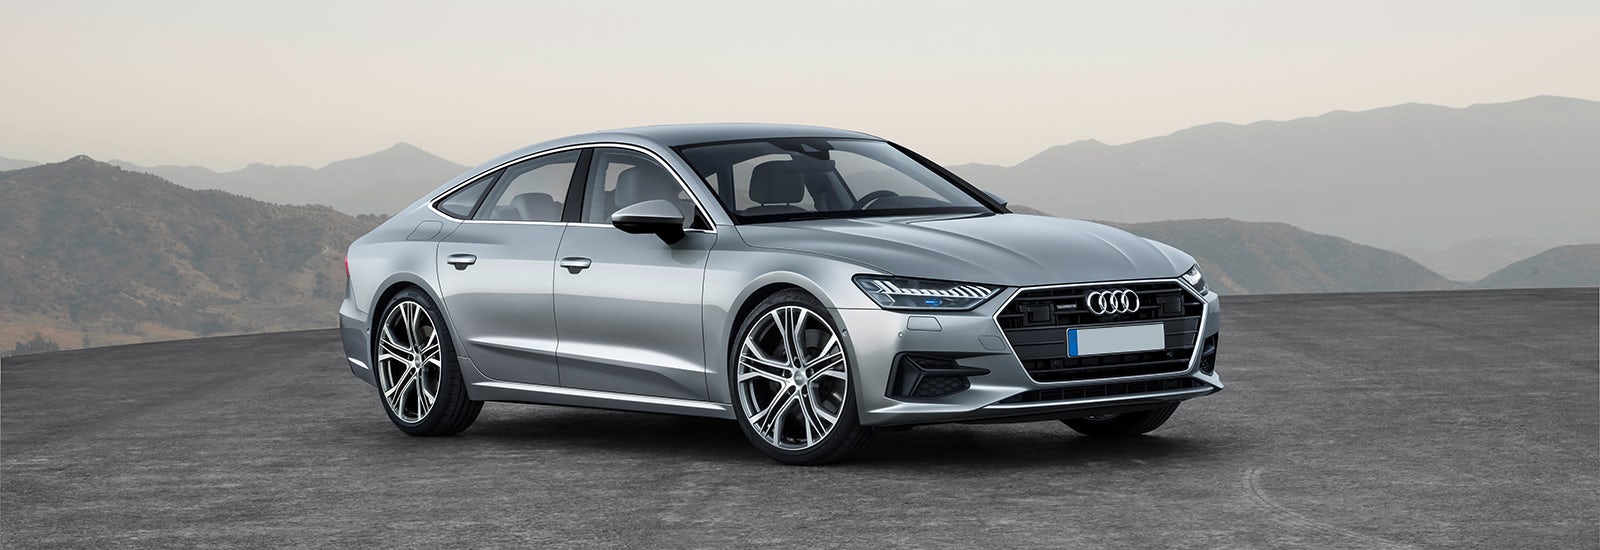 New 2018 Audi A7 RS7 price specs and release date carwow